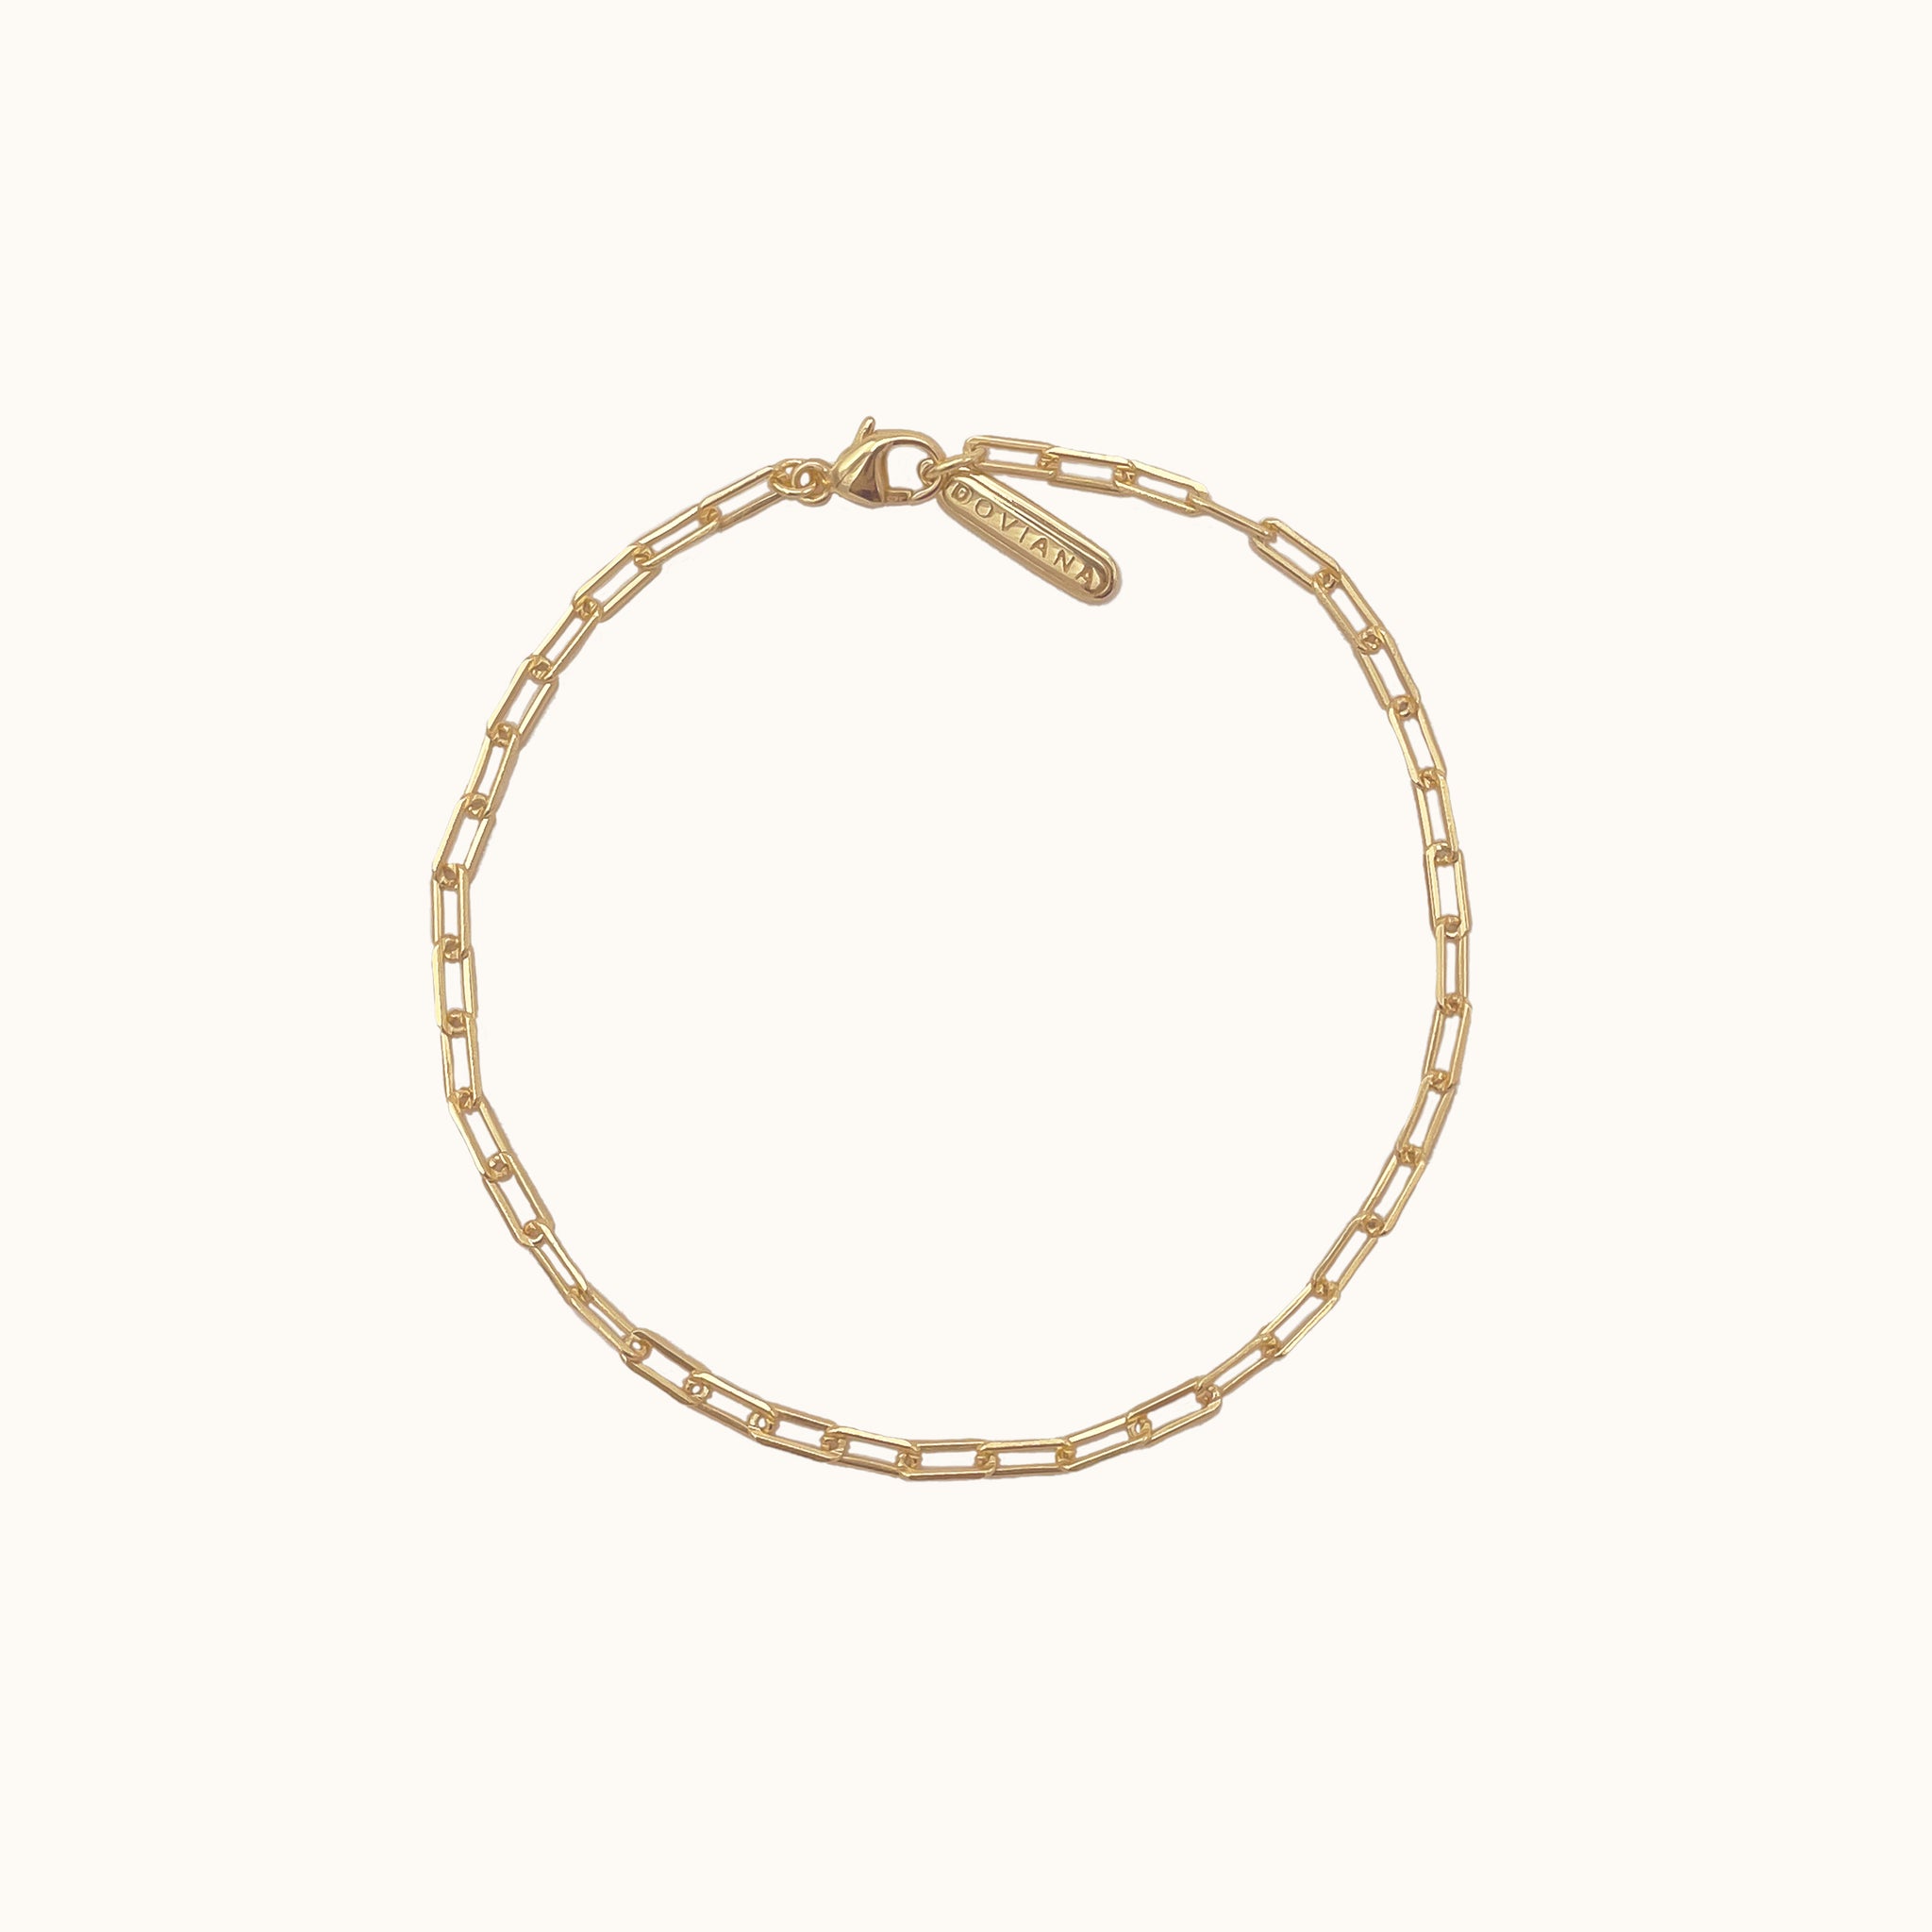 Gold Baby Paperclip Link Chain Bracelet Square Adjustable Chunky Classic by Doviana